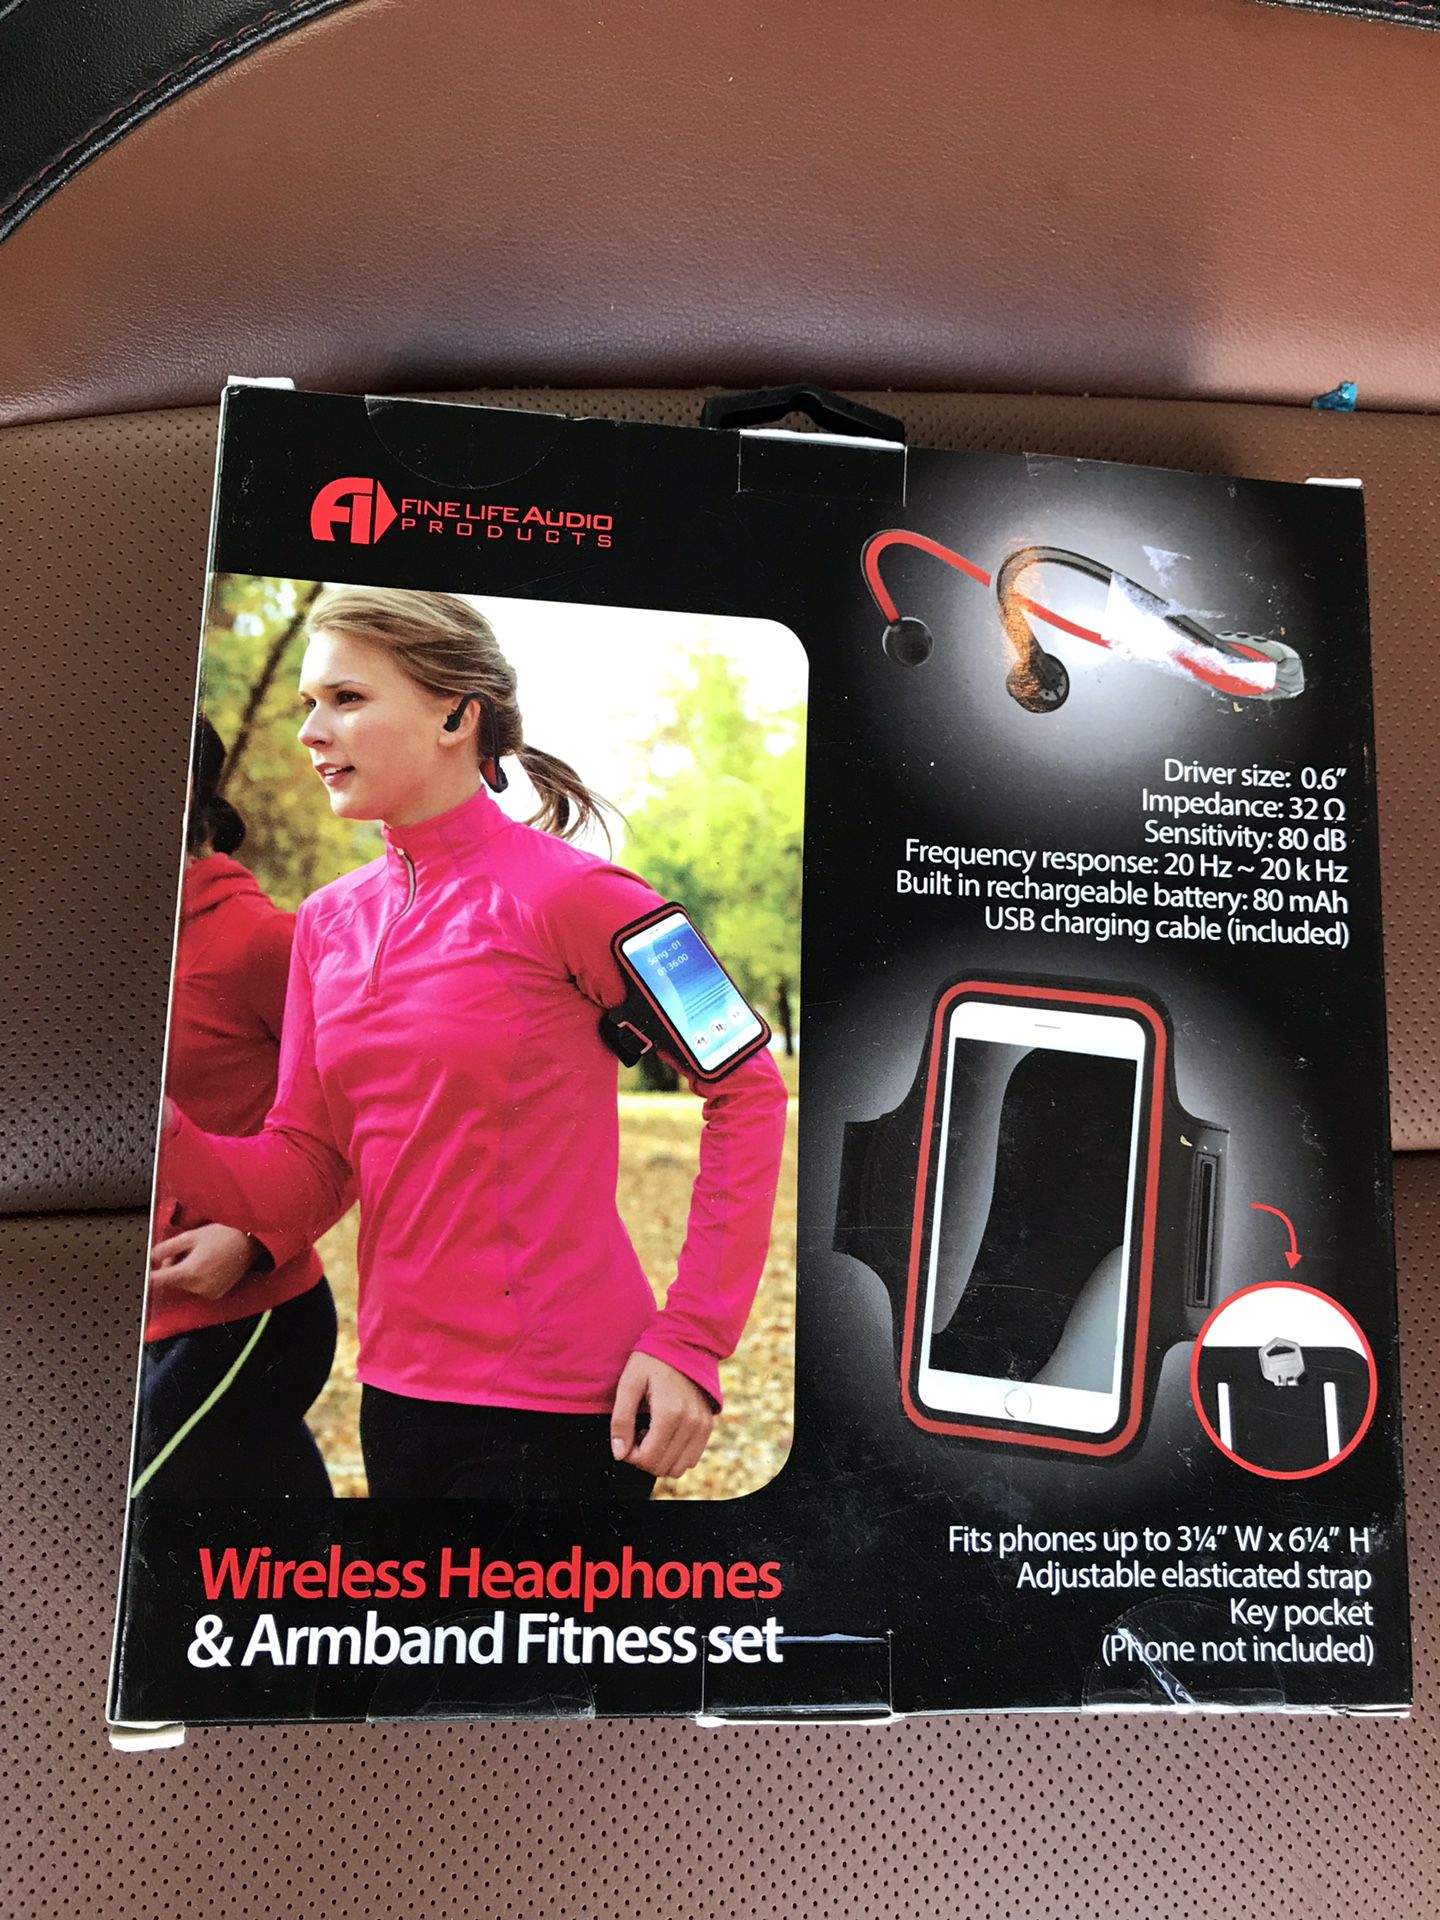 Brand new wireless headphones and armband. 2 in 1